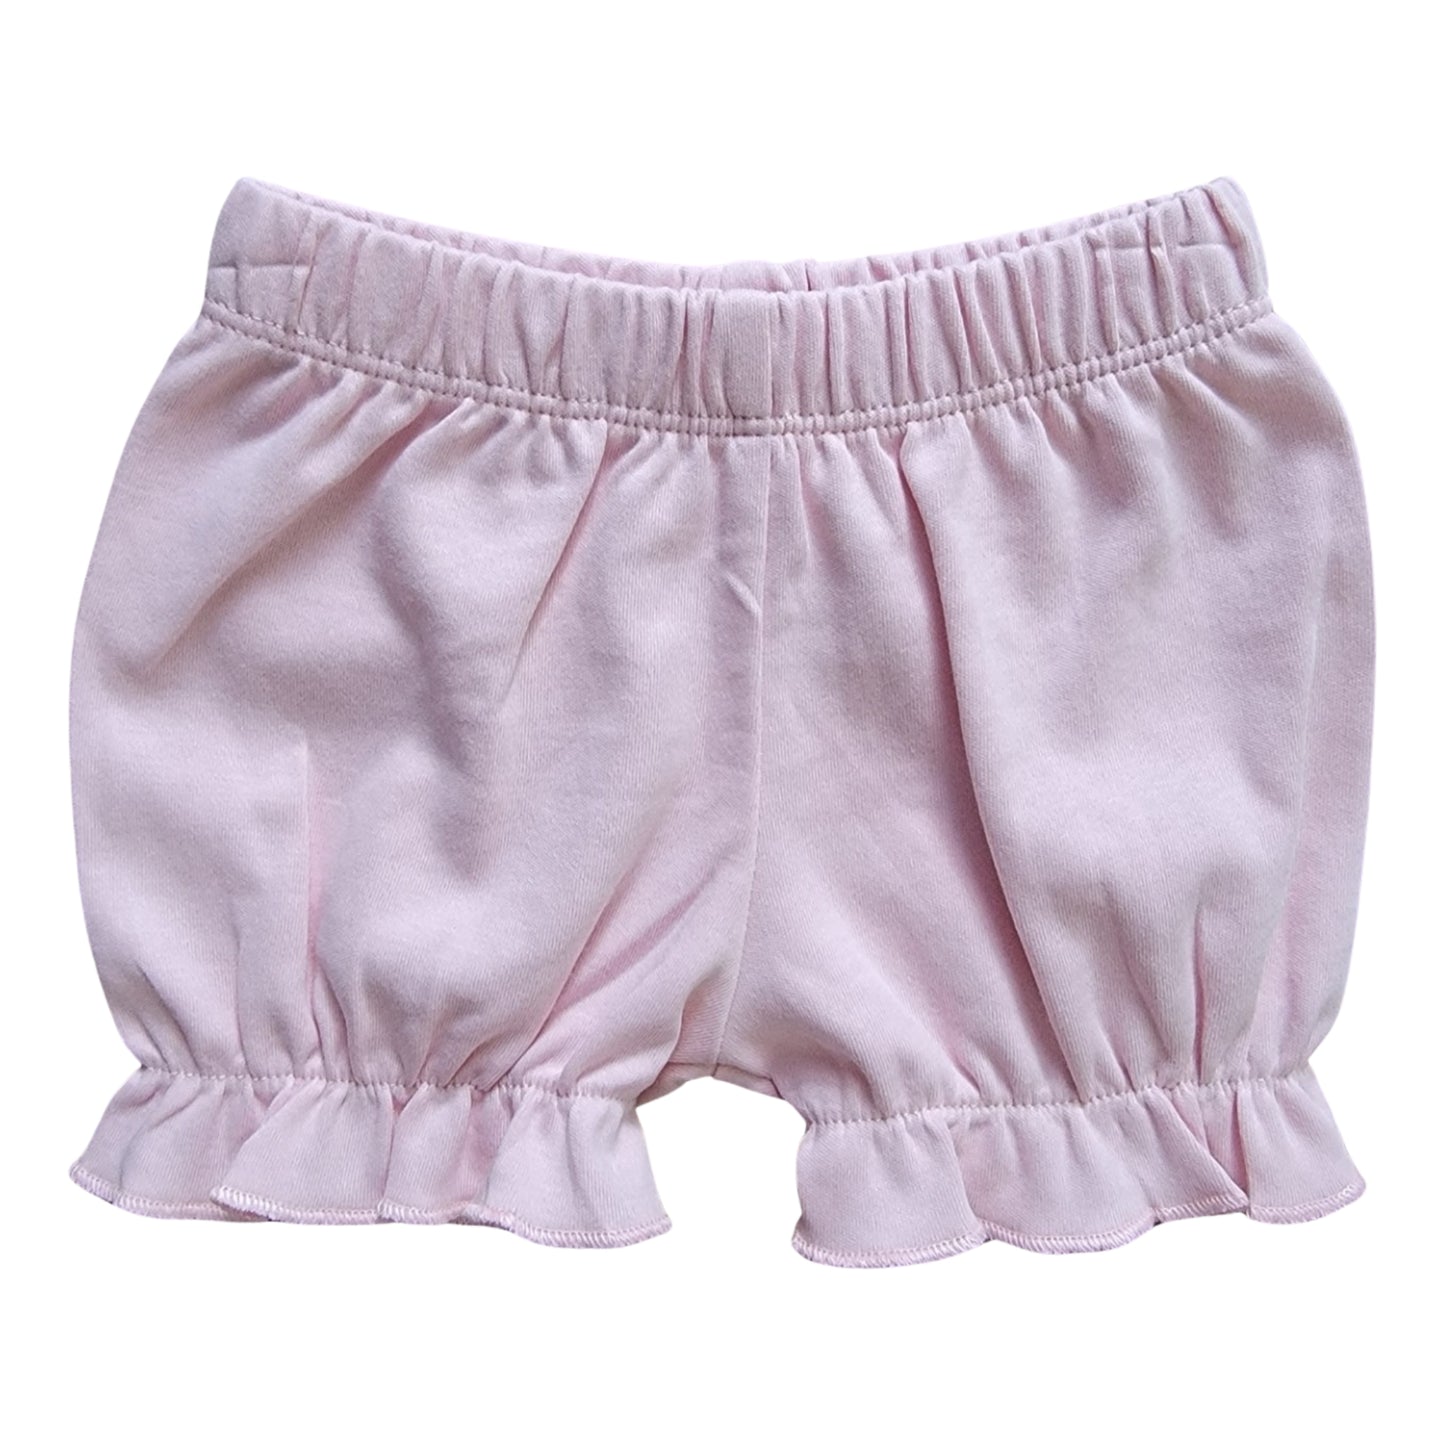 Girl's Bubble Short Bloomers, Light Pink